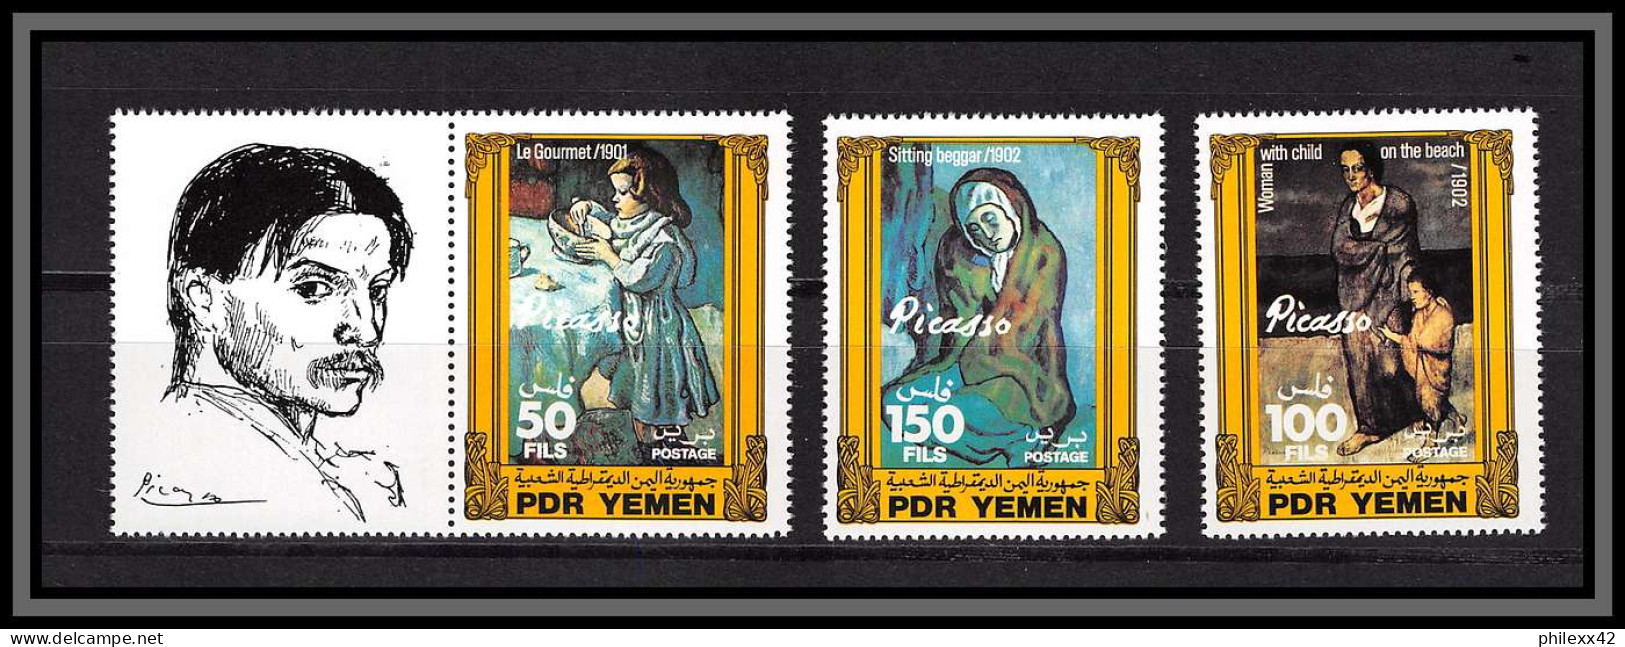 South Yemen PDR 6006a N°309/311 + Bloc 9 Oicasso Tableau (Painting) 1983 ** MNH Cote + 30 Euros - Picasso